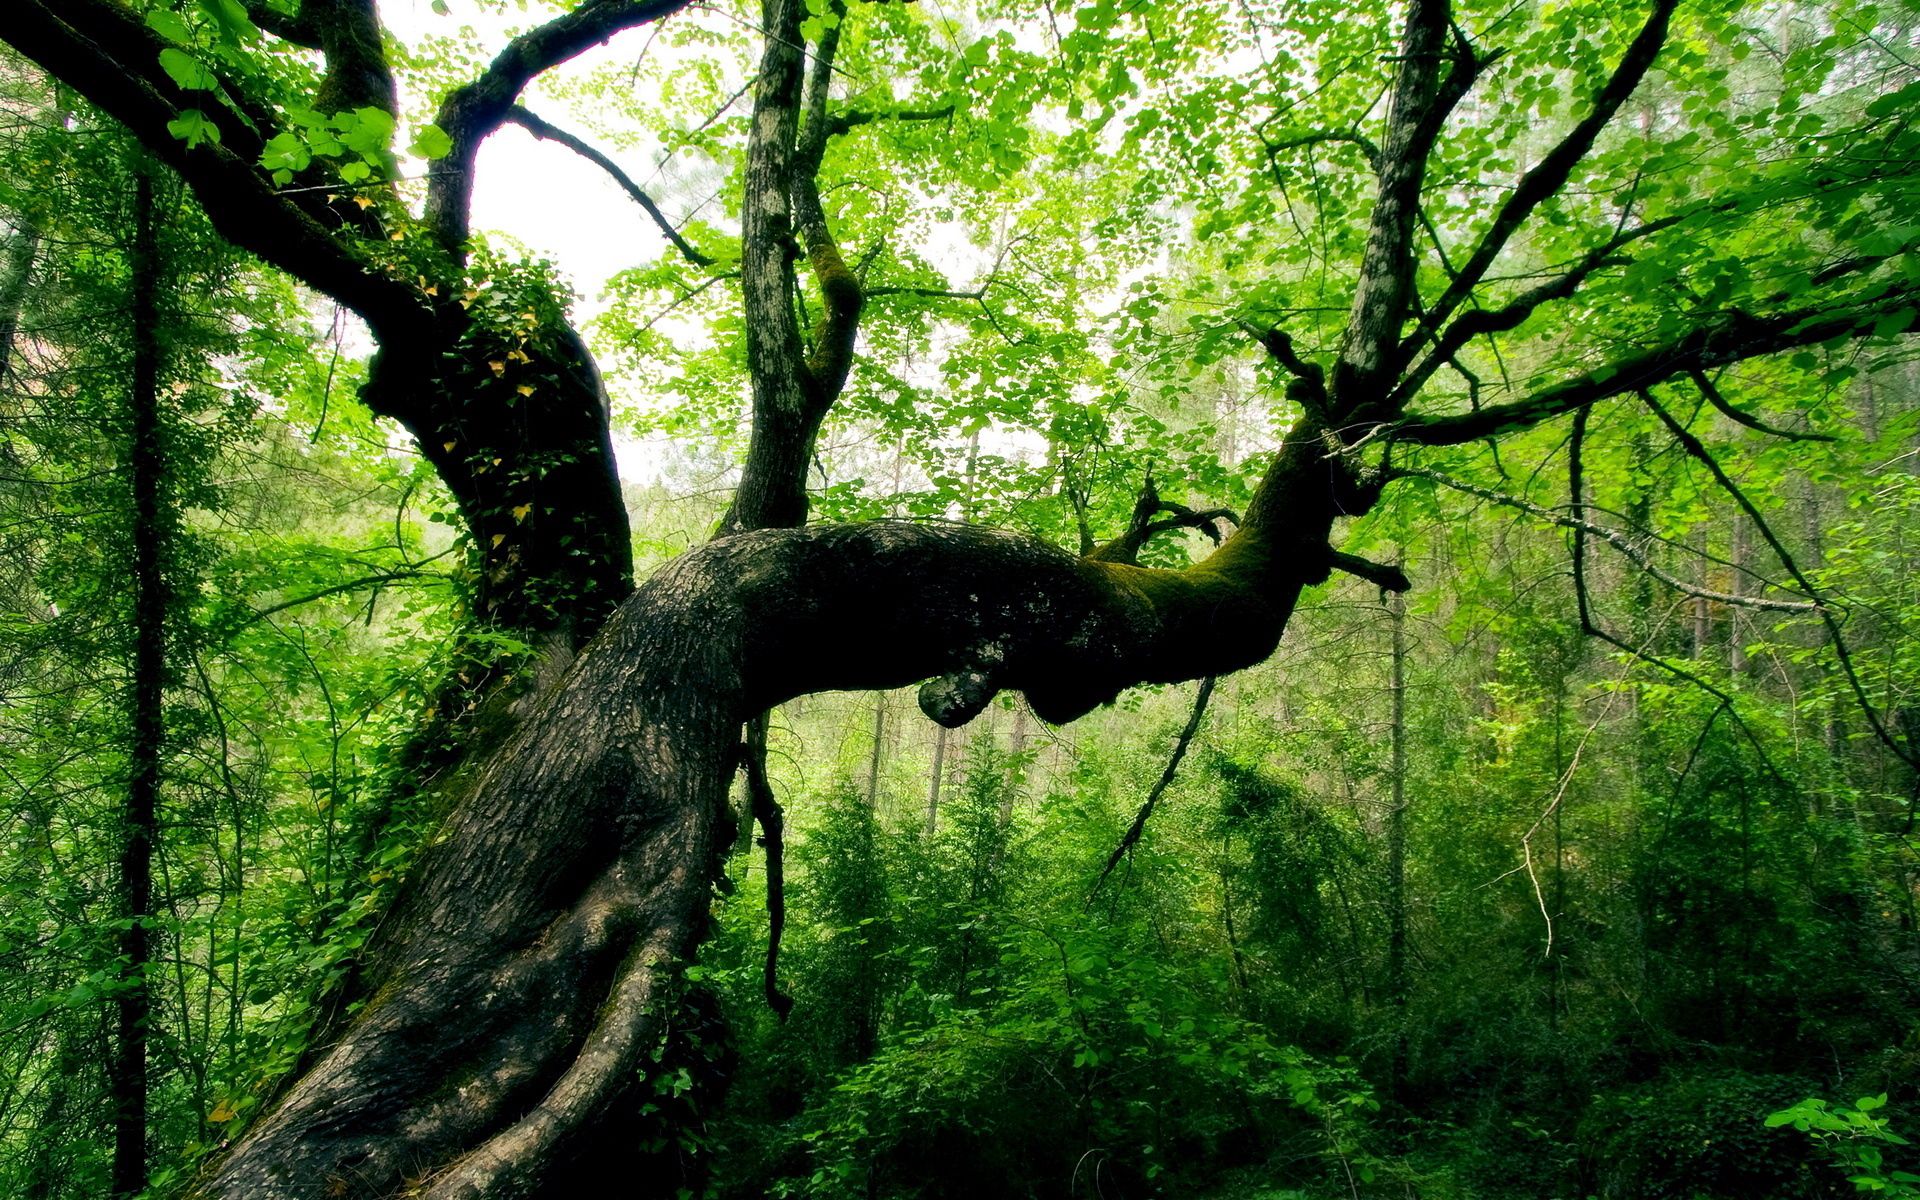 creepy, nature, leaves, green, wood, forest, tree, bends, trunk